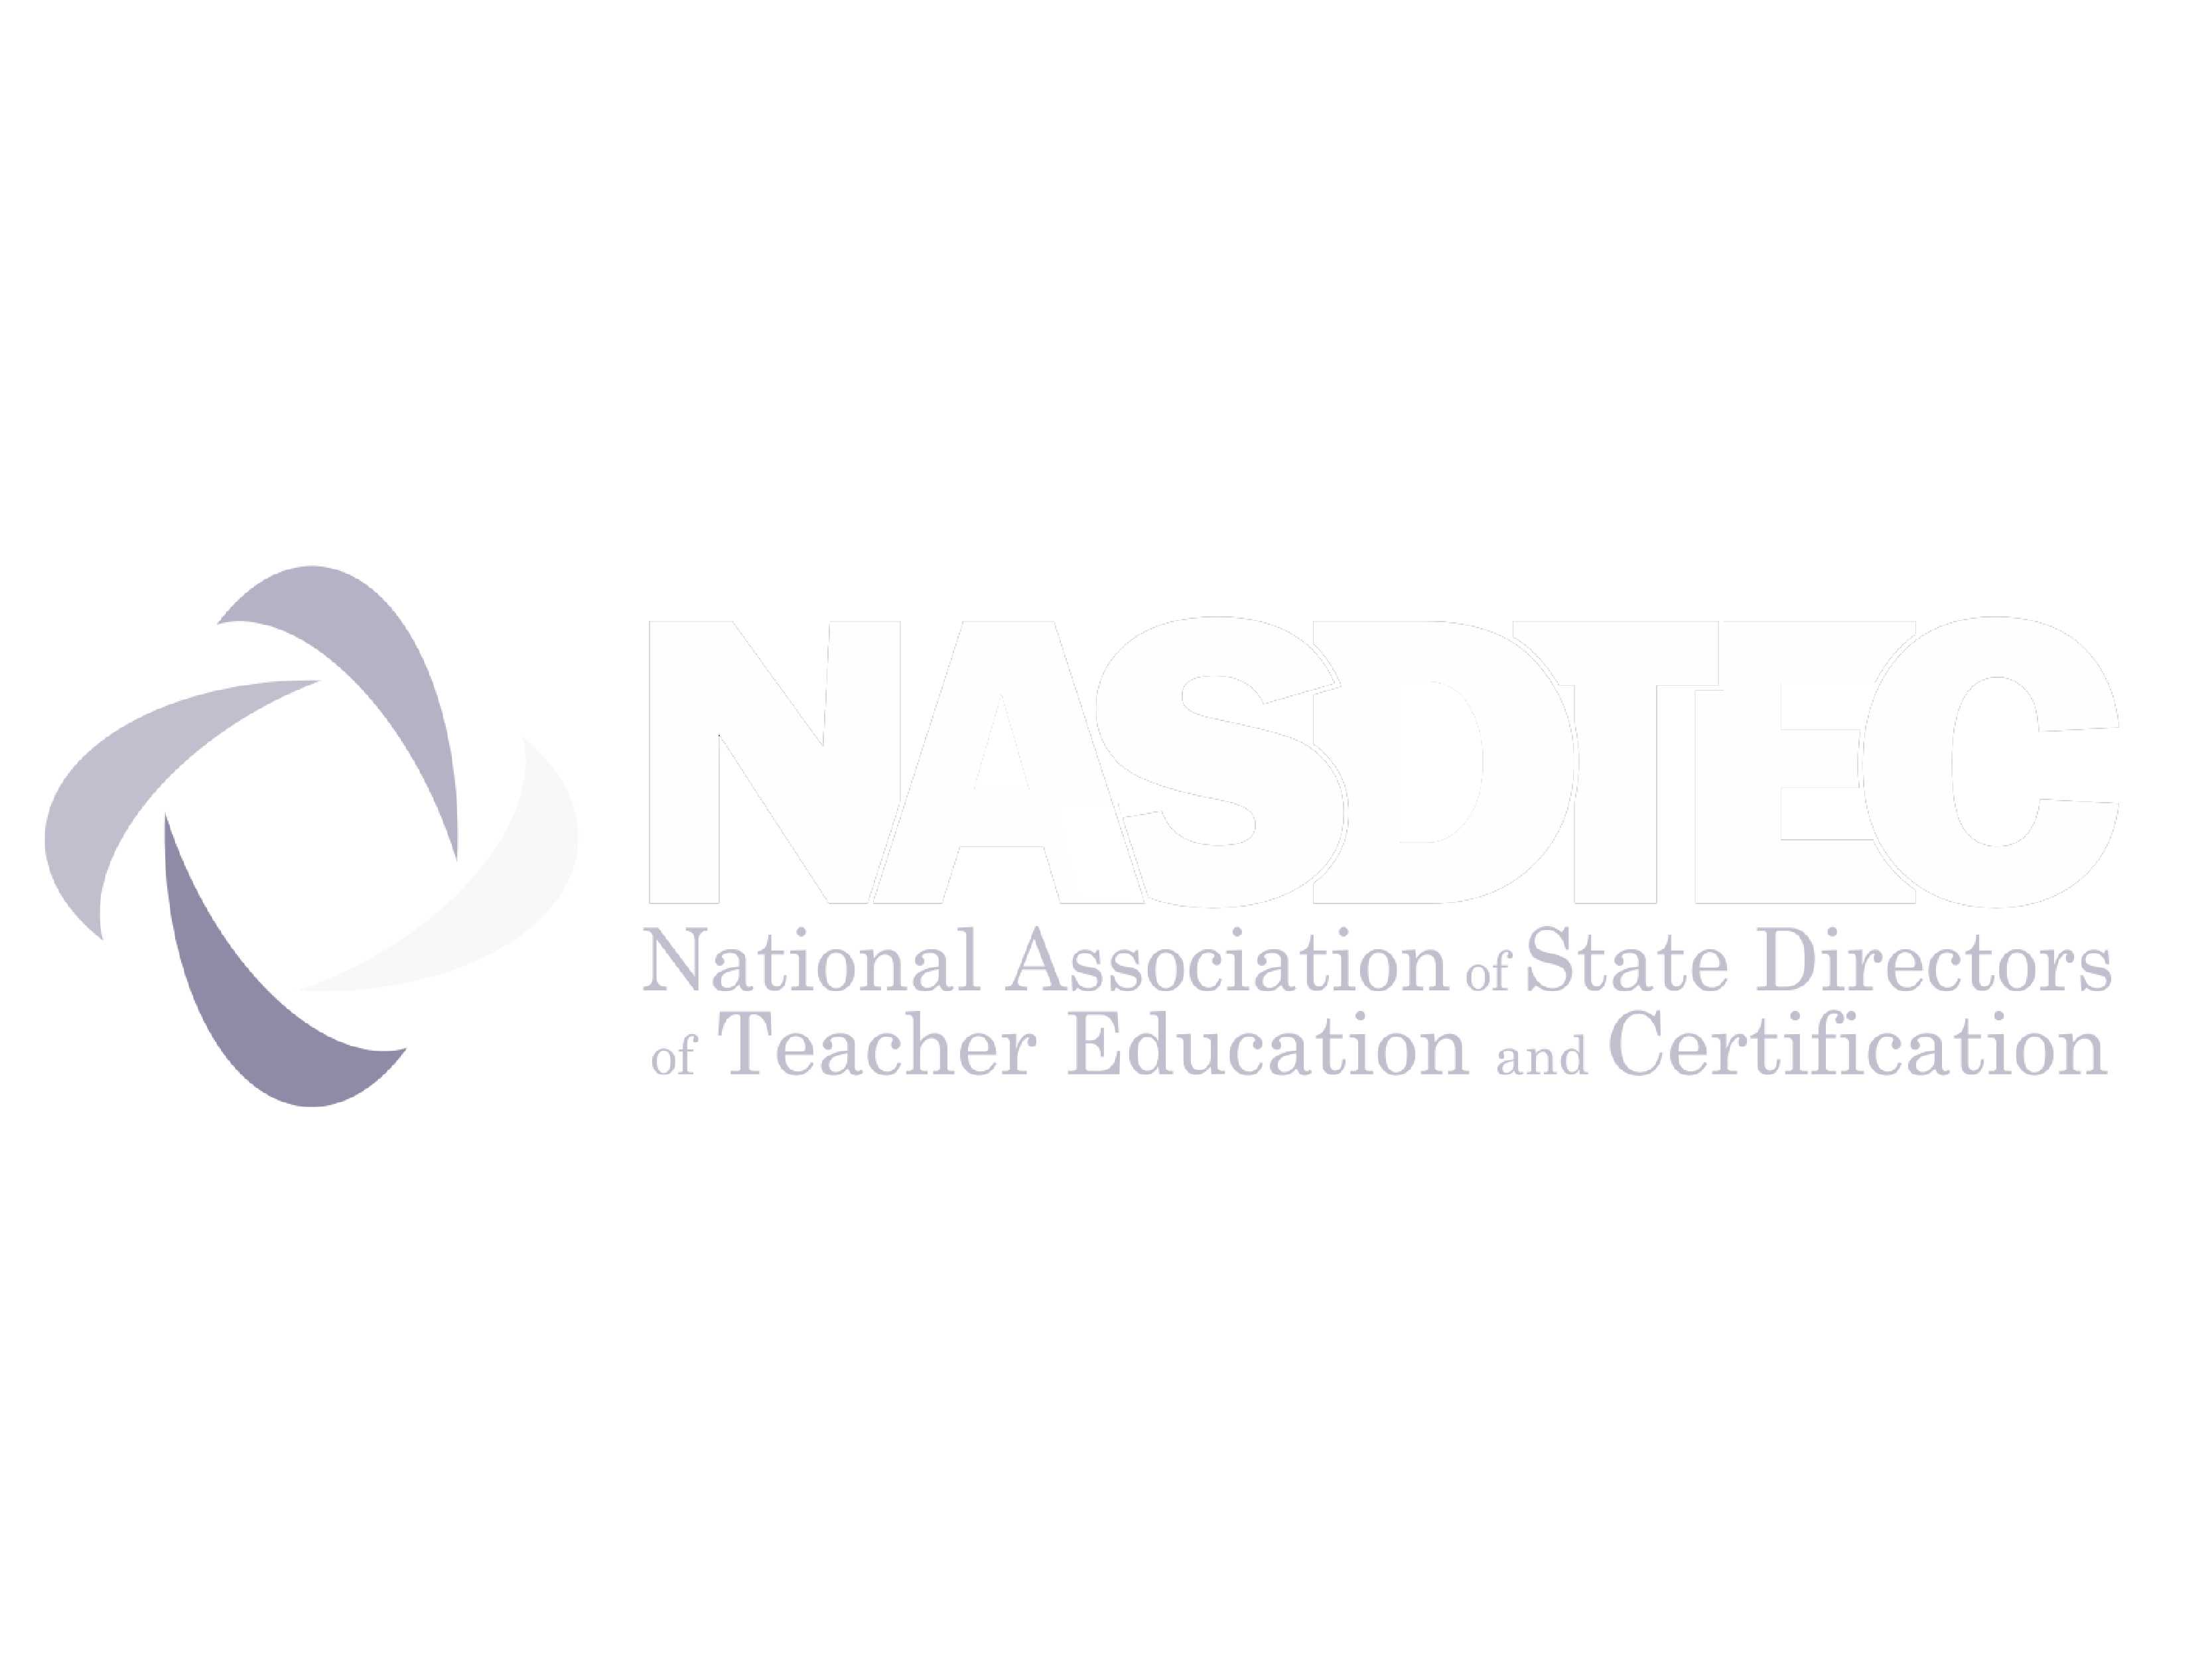 National Association of State Directors of Teacher Education and Certification logo